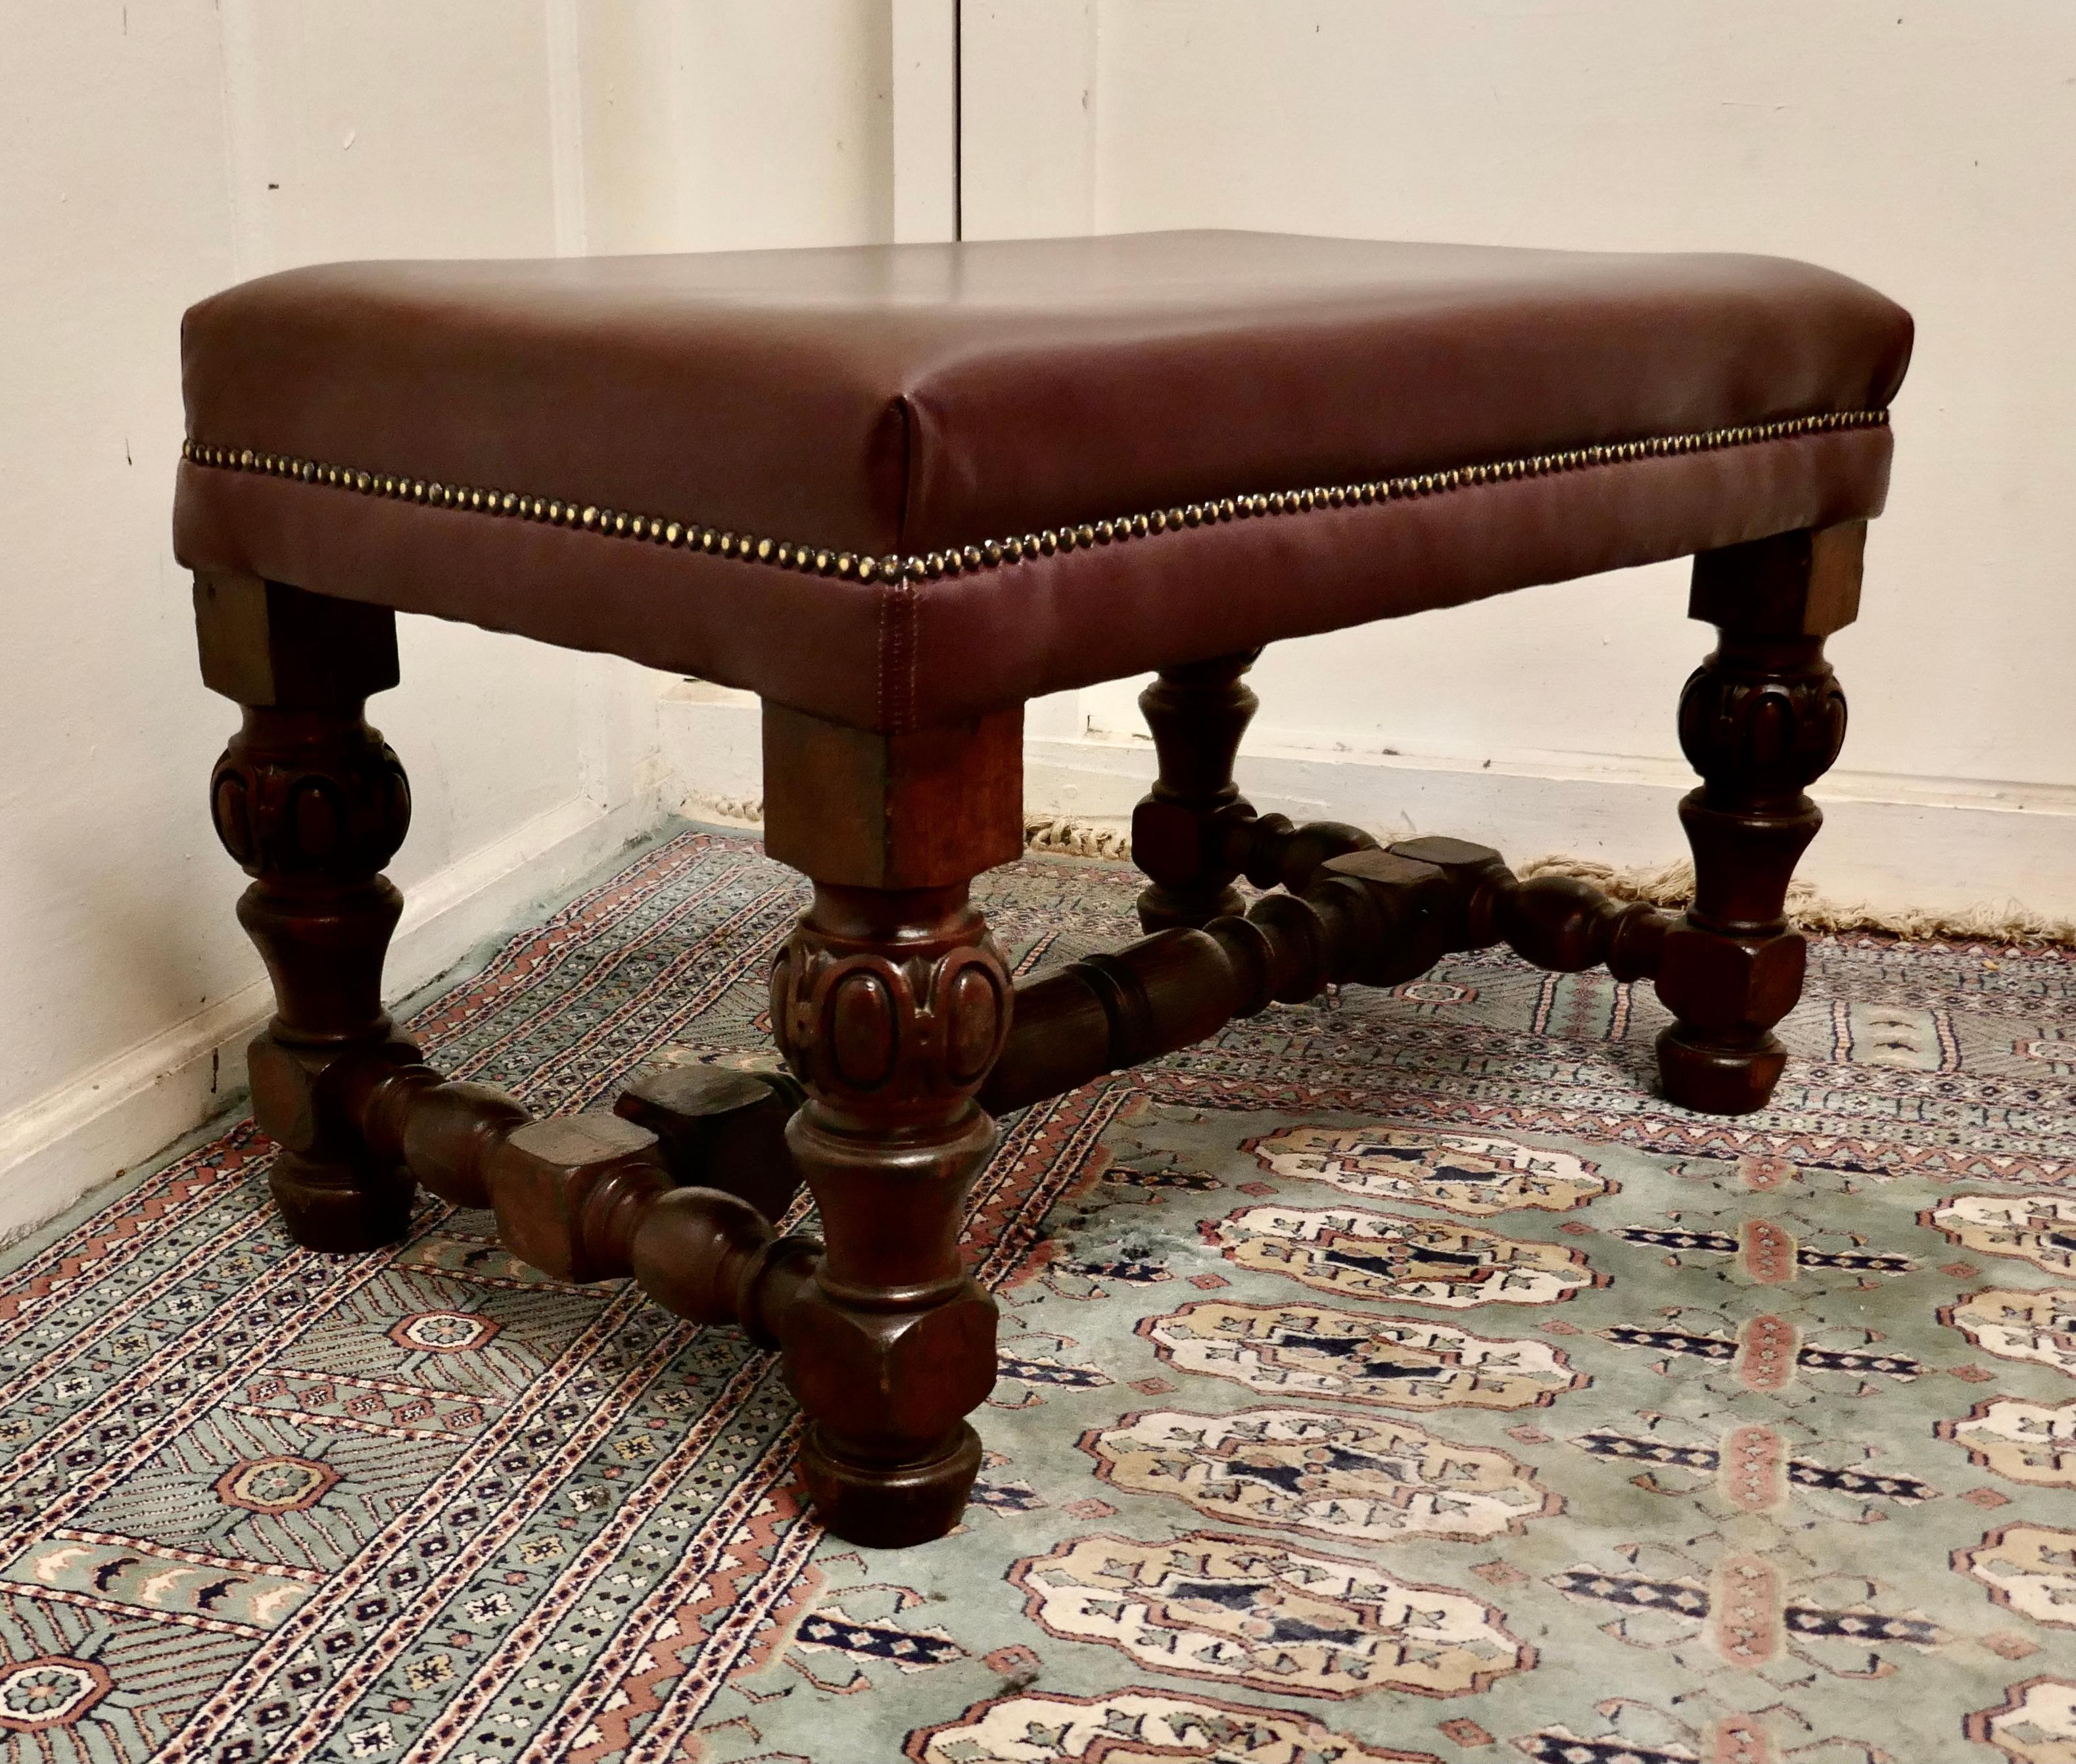 Large Victorian oak and leather library stool

The stool or window seat has chunky turned and carved legs with a turned cross stretcher 
The stool is upholstered in burgundy leather with brass studs 
This large sturdy library stool would work